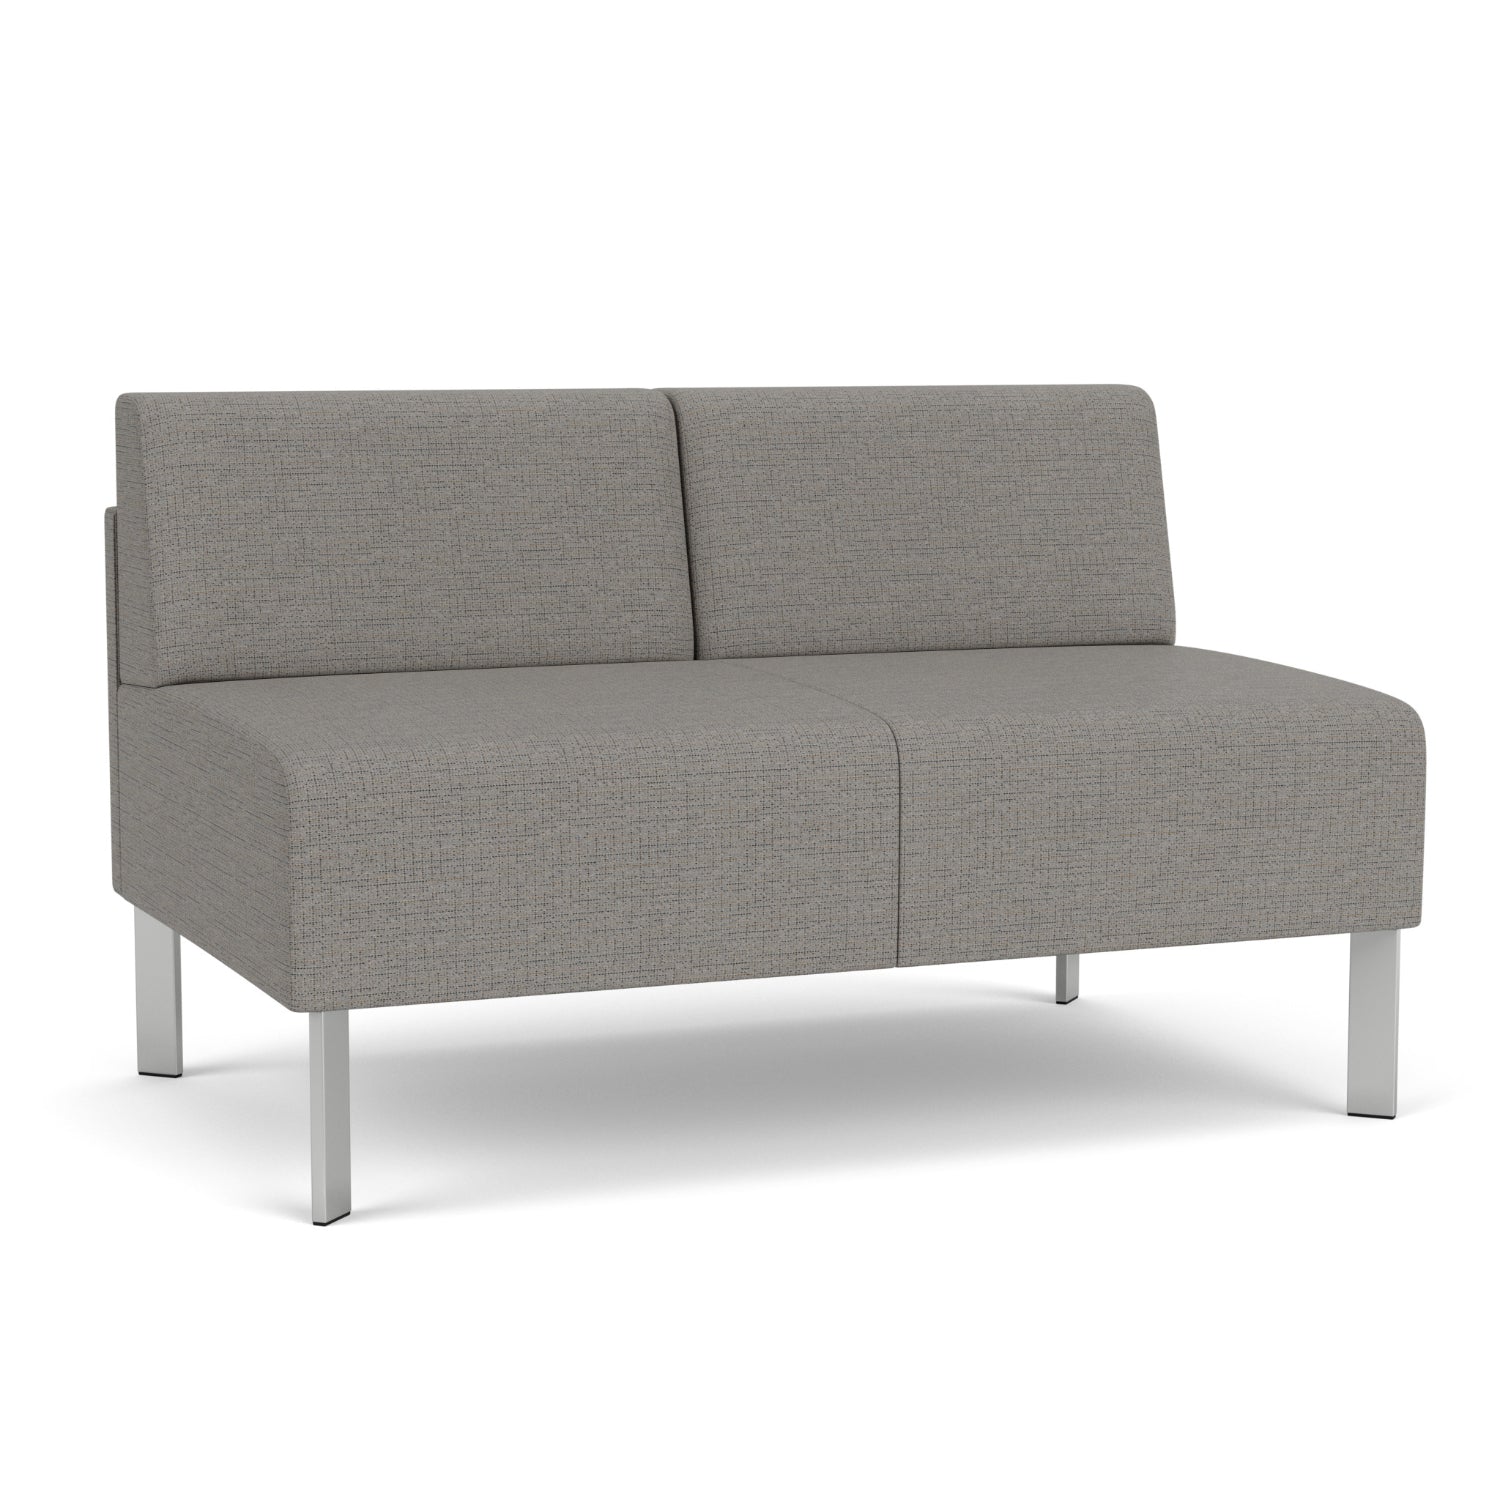 Luxe Collection Reception Seating, Armless Loveseat, Designer Fabric Upholstery, FREE SHIPPING